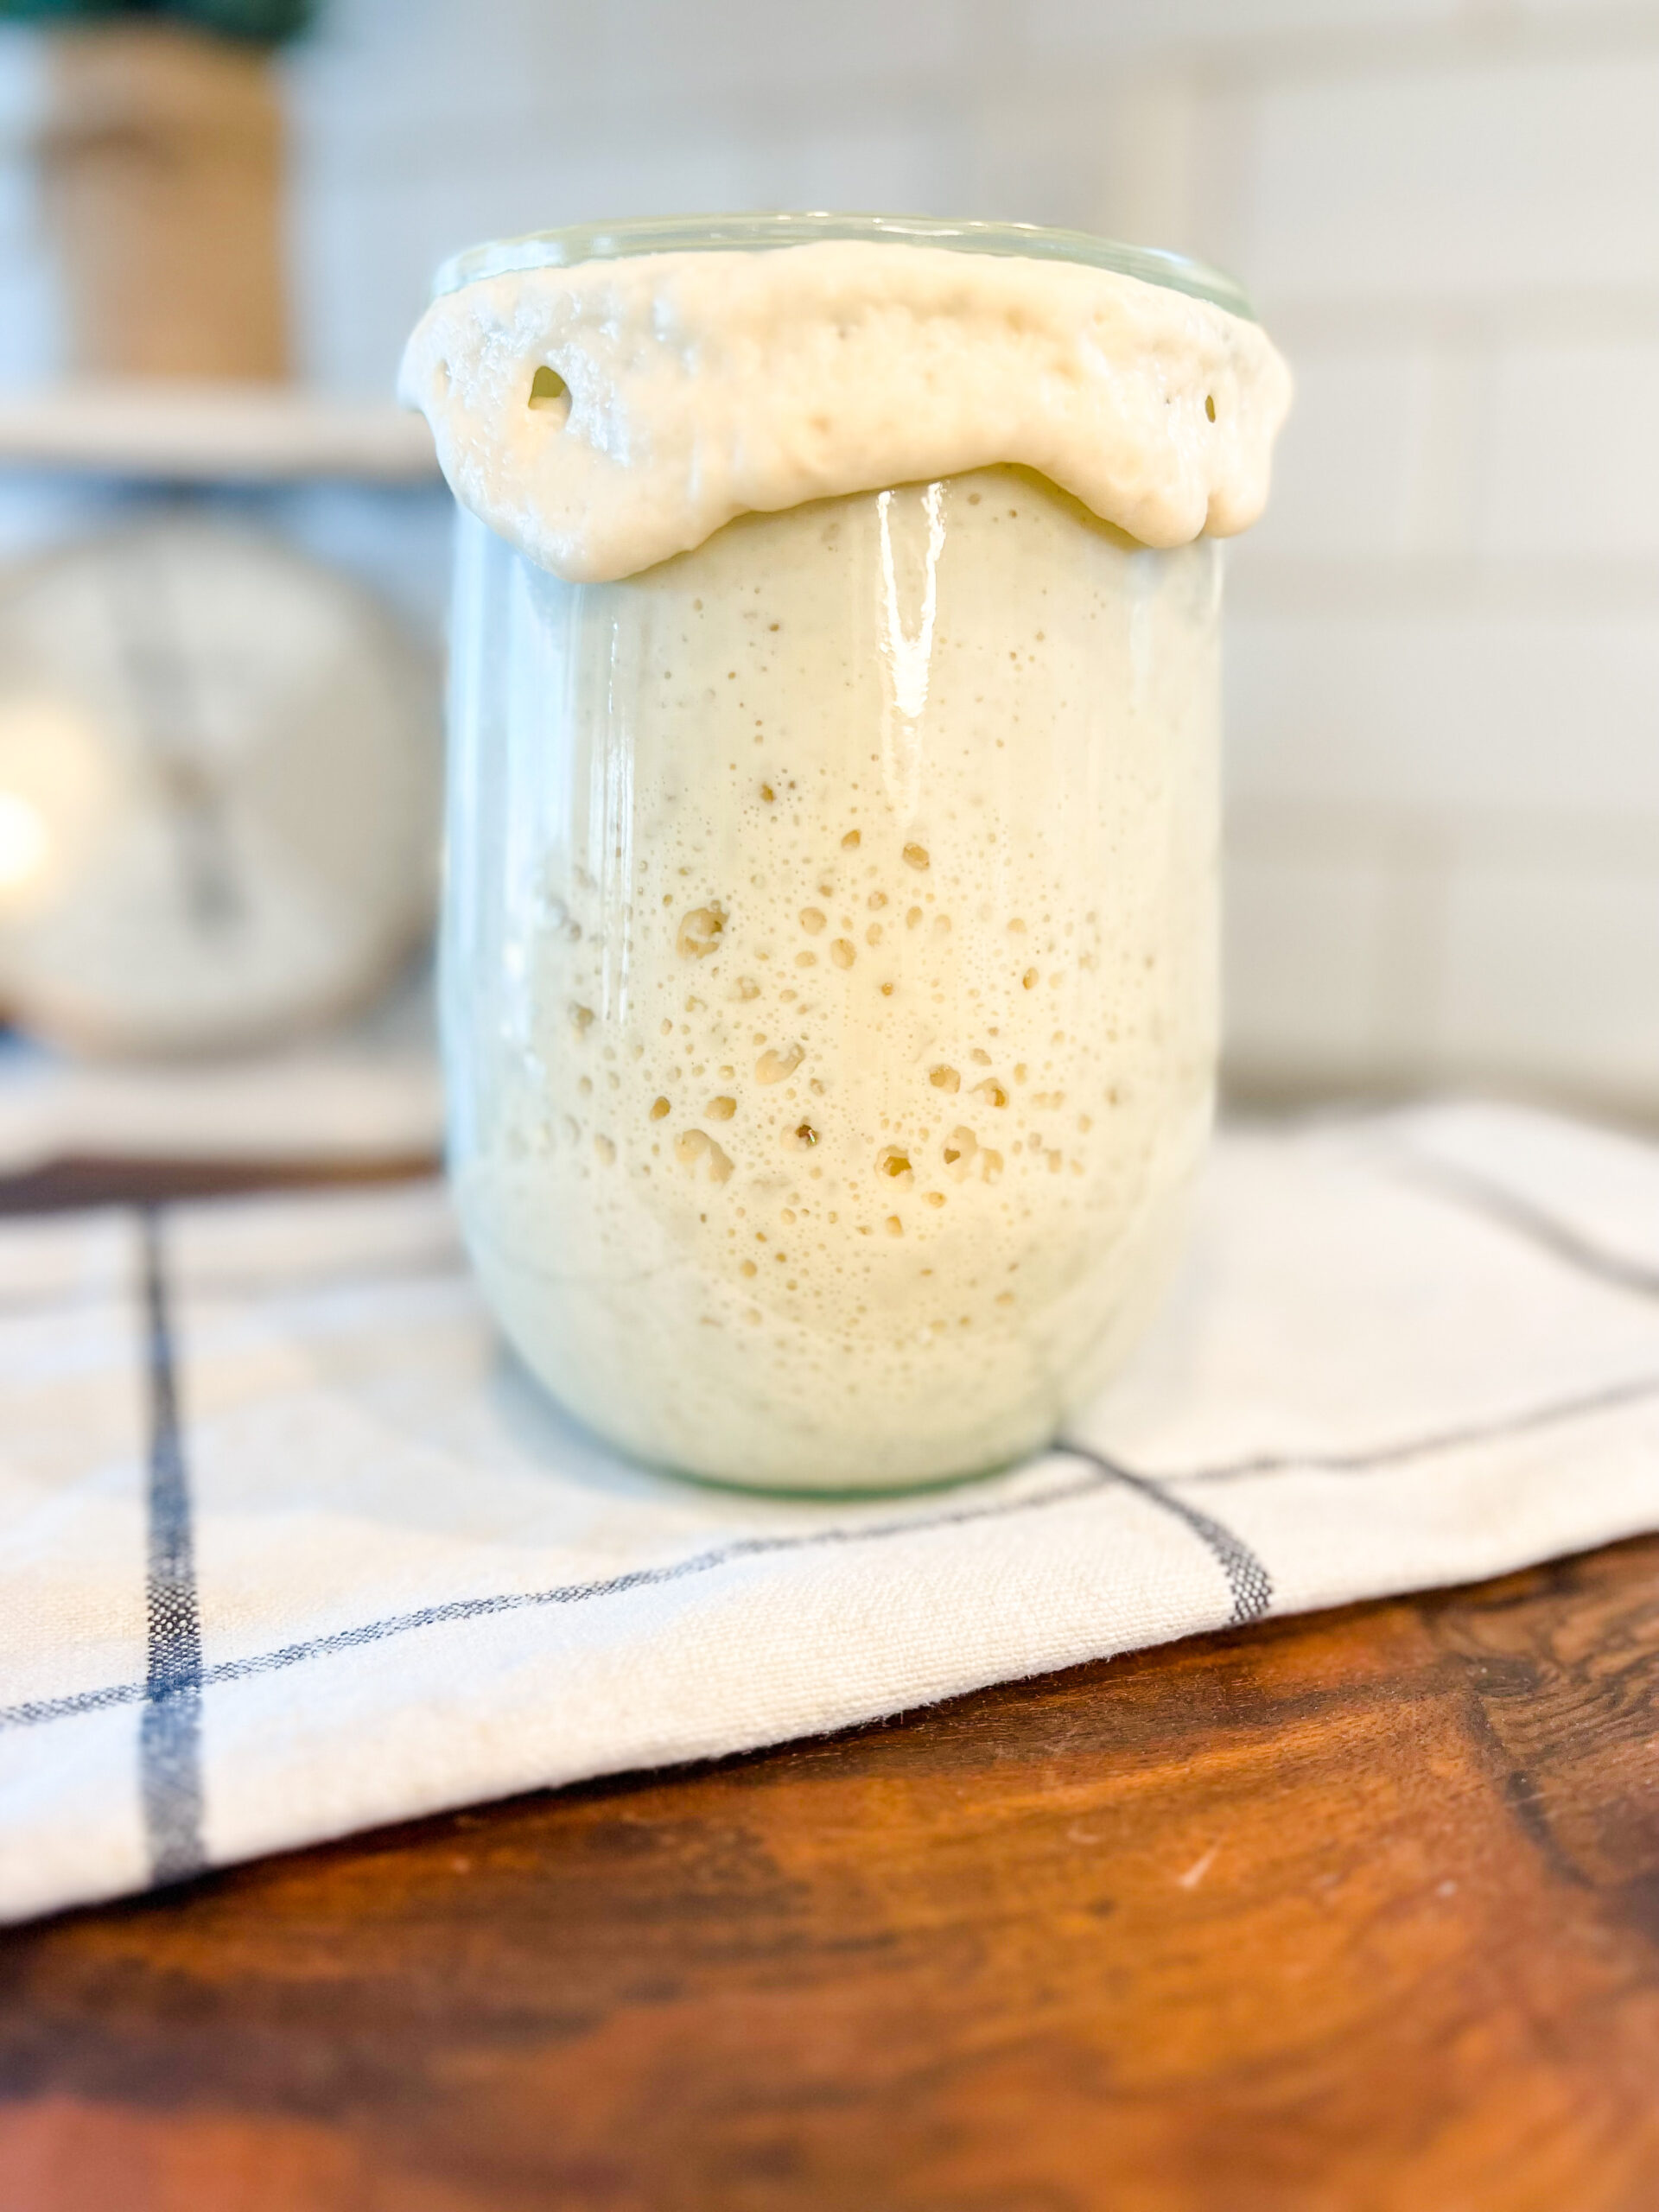 How to Maintain and Feed A Sourdough Starter